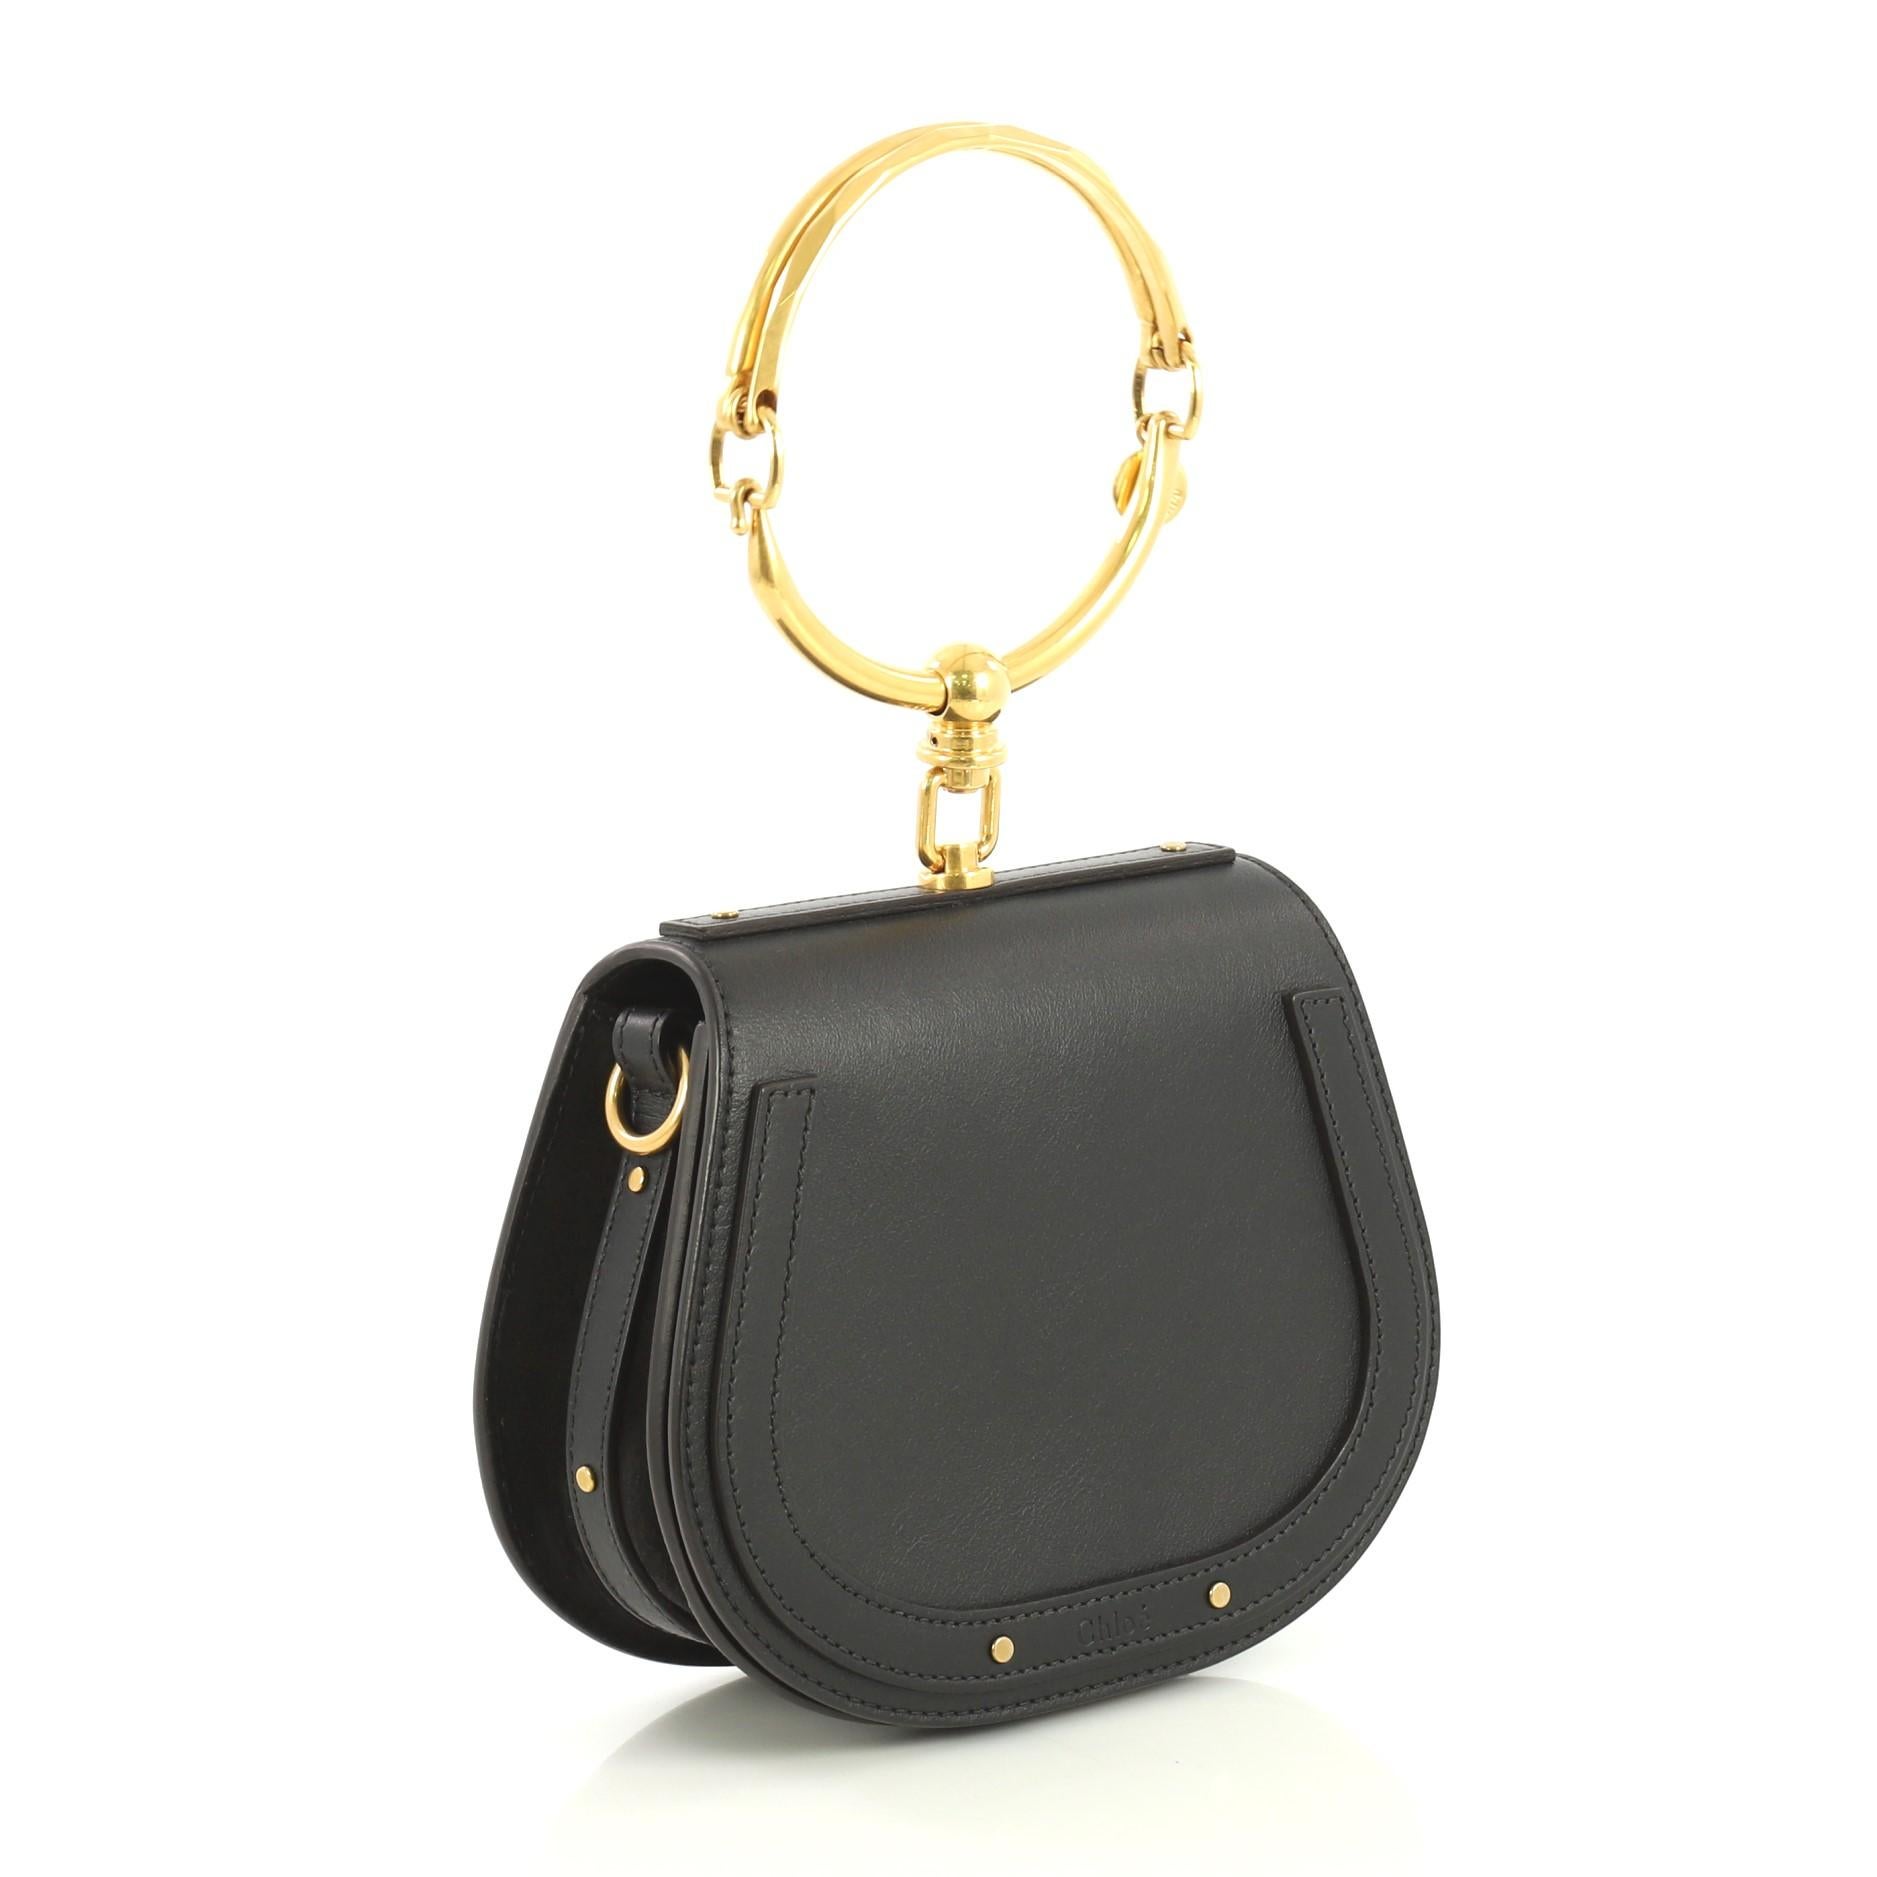 This Chloe Nile Crossbody Bag Leather Small, crafted from black leather, features ring bracelet handle, exterior back slip pocket, and aged gold-tone hardware. Its magnetic snap button closure opens to a neutral suede interior with slip pocket.